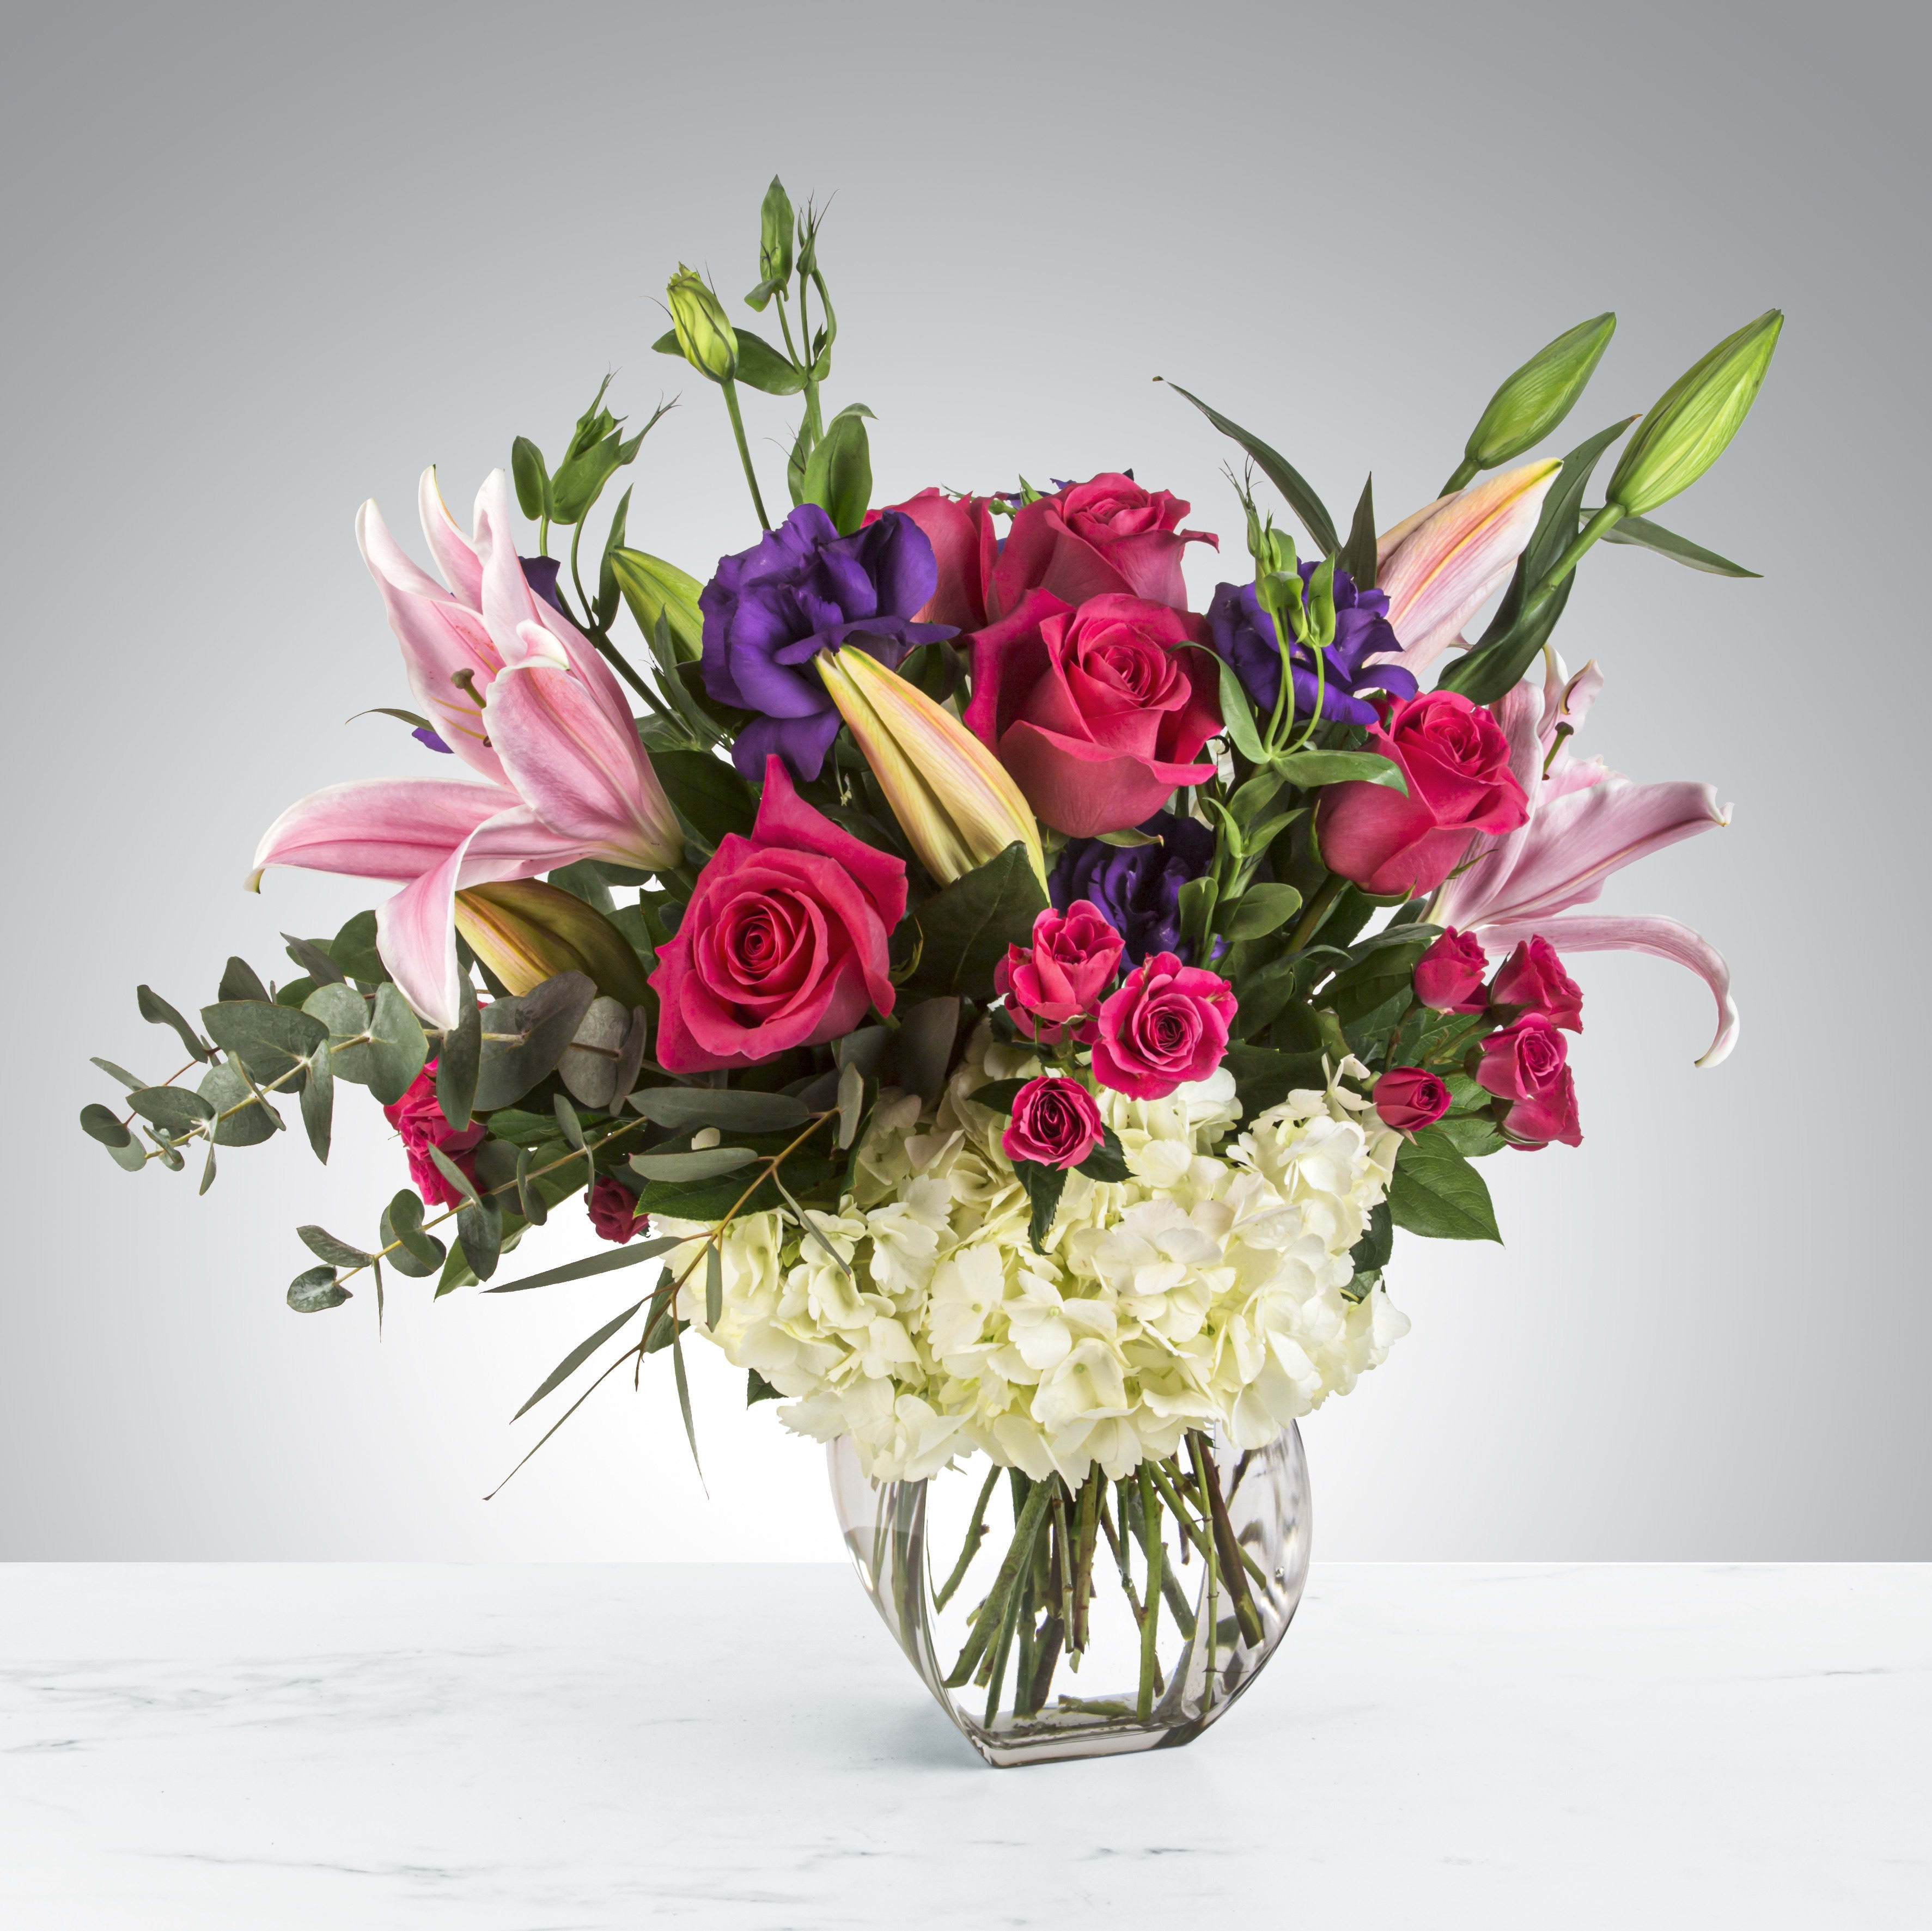 Make Plans  - Bright pink roses and stargazer lilies come together with purple lisianthus and greenery for this large arrangement. Styled in a natural shape, this arrangement would impress anybody.    